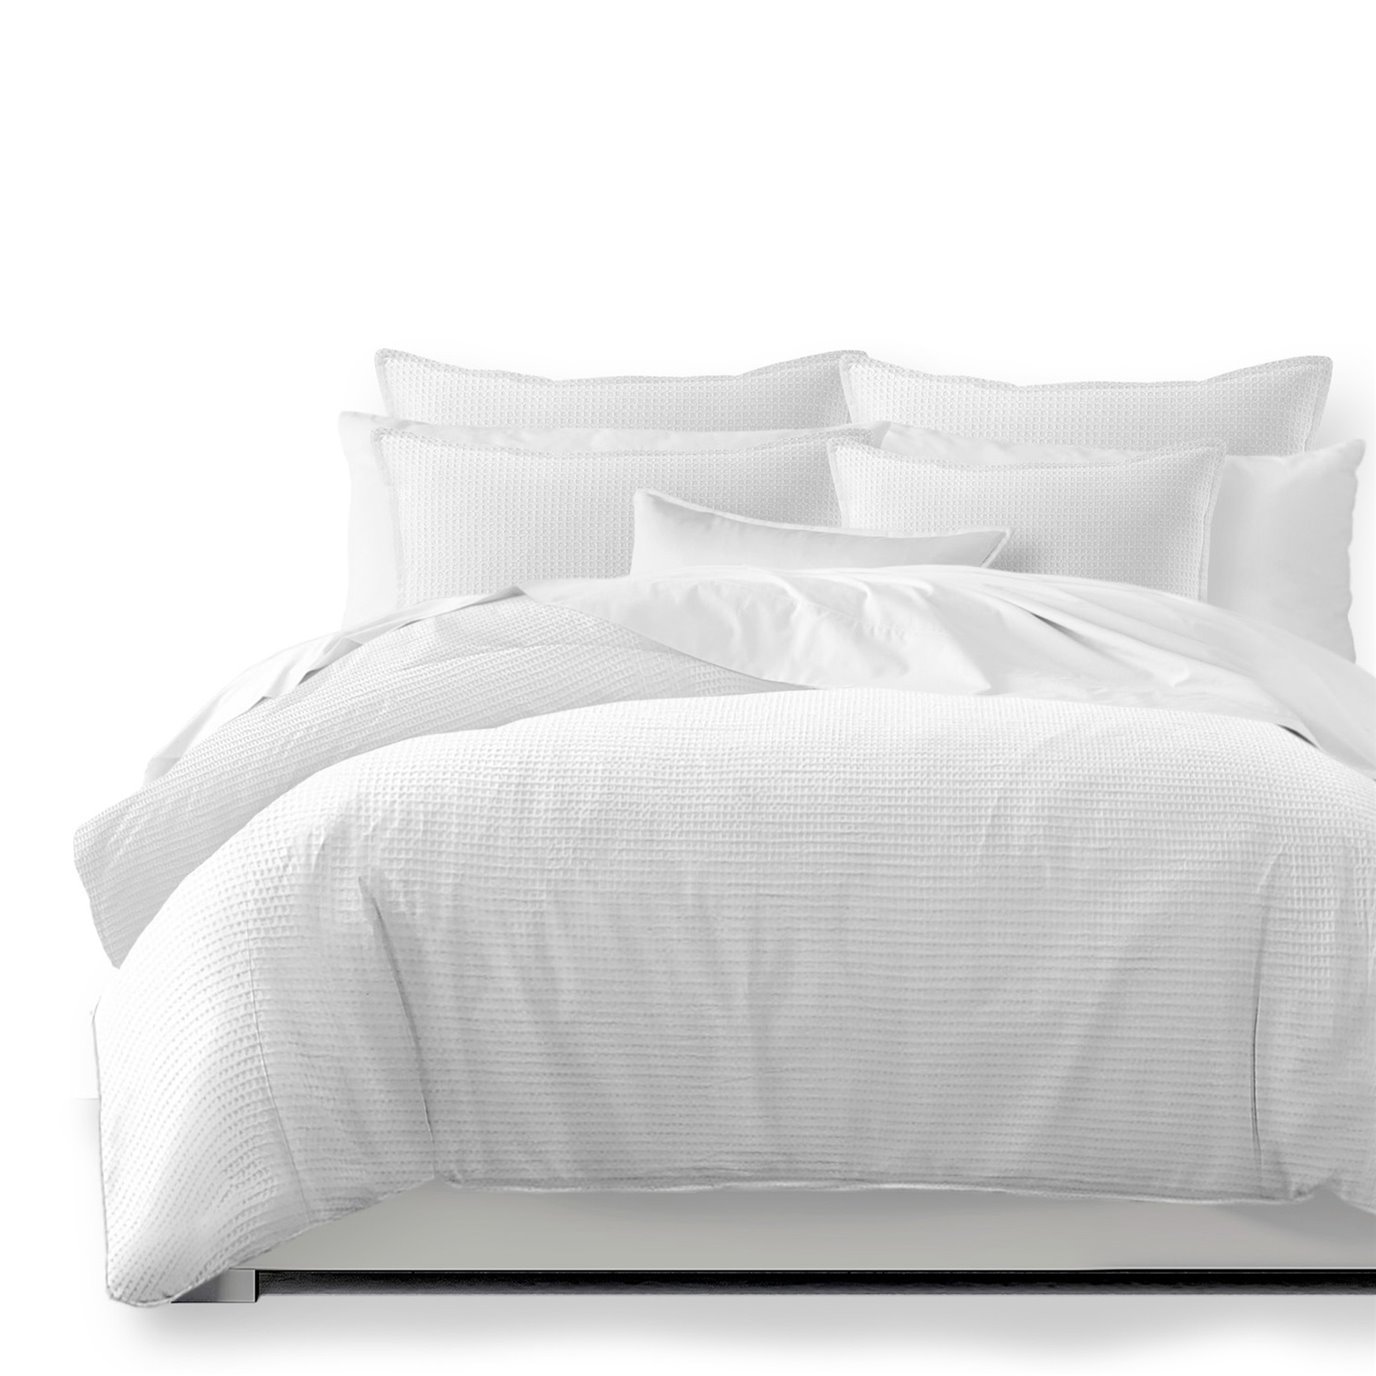 Classic Waffle White Duvet Cover and Pillow Sham(s) Set - Size Queen